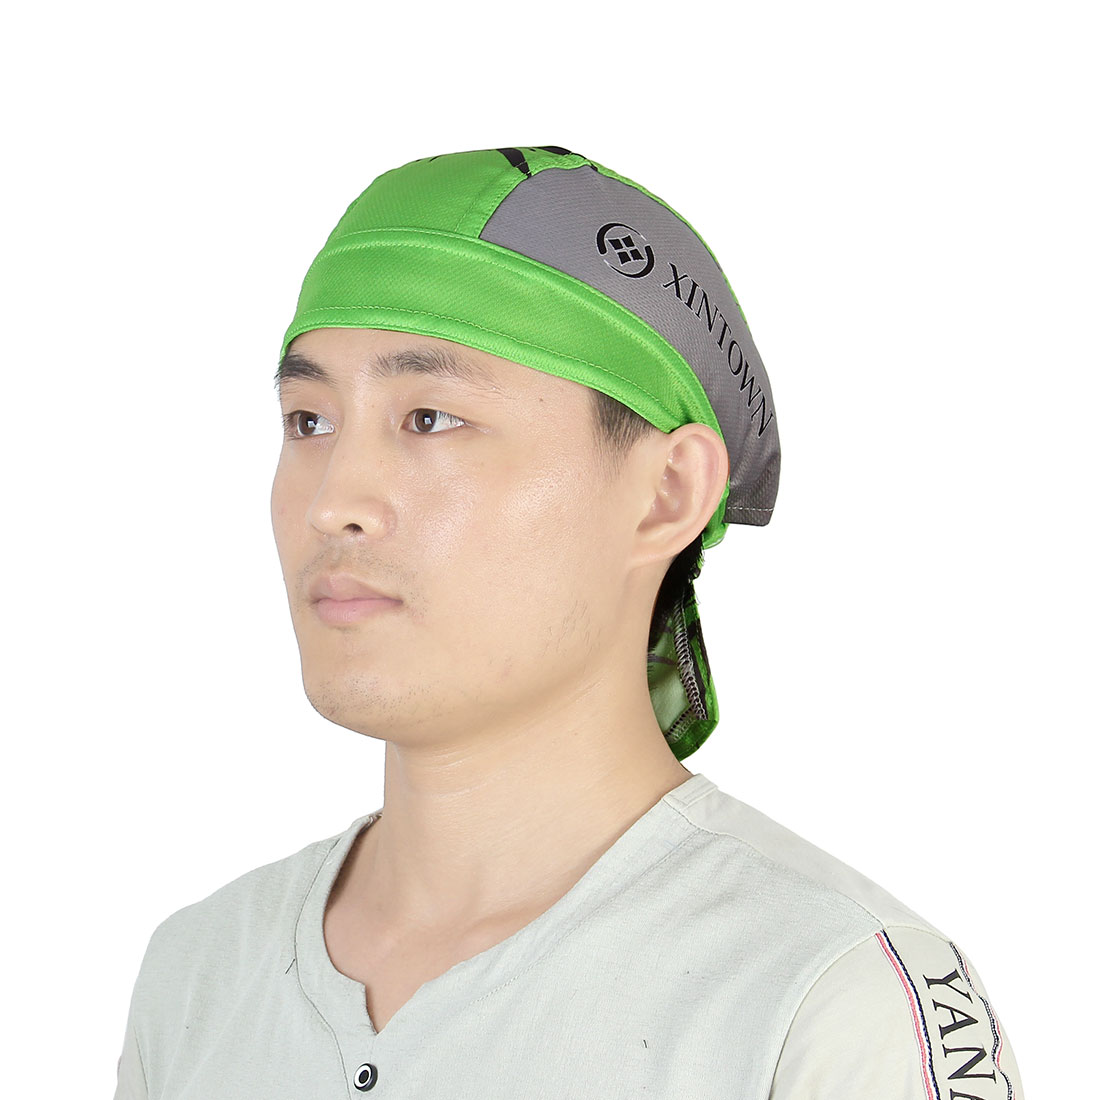 Unique Bargains XINTOWN Authorized Unisex Outdoor Headscarf Cap Cycling Sports Pirate Hat Green